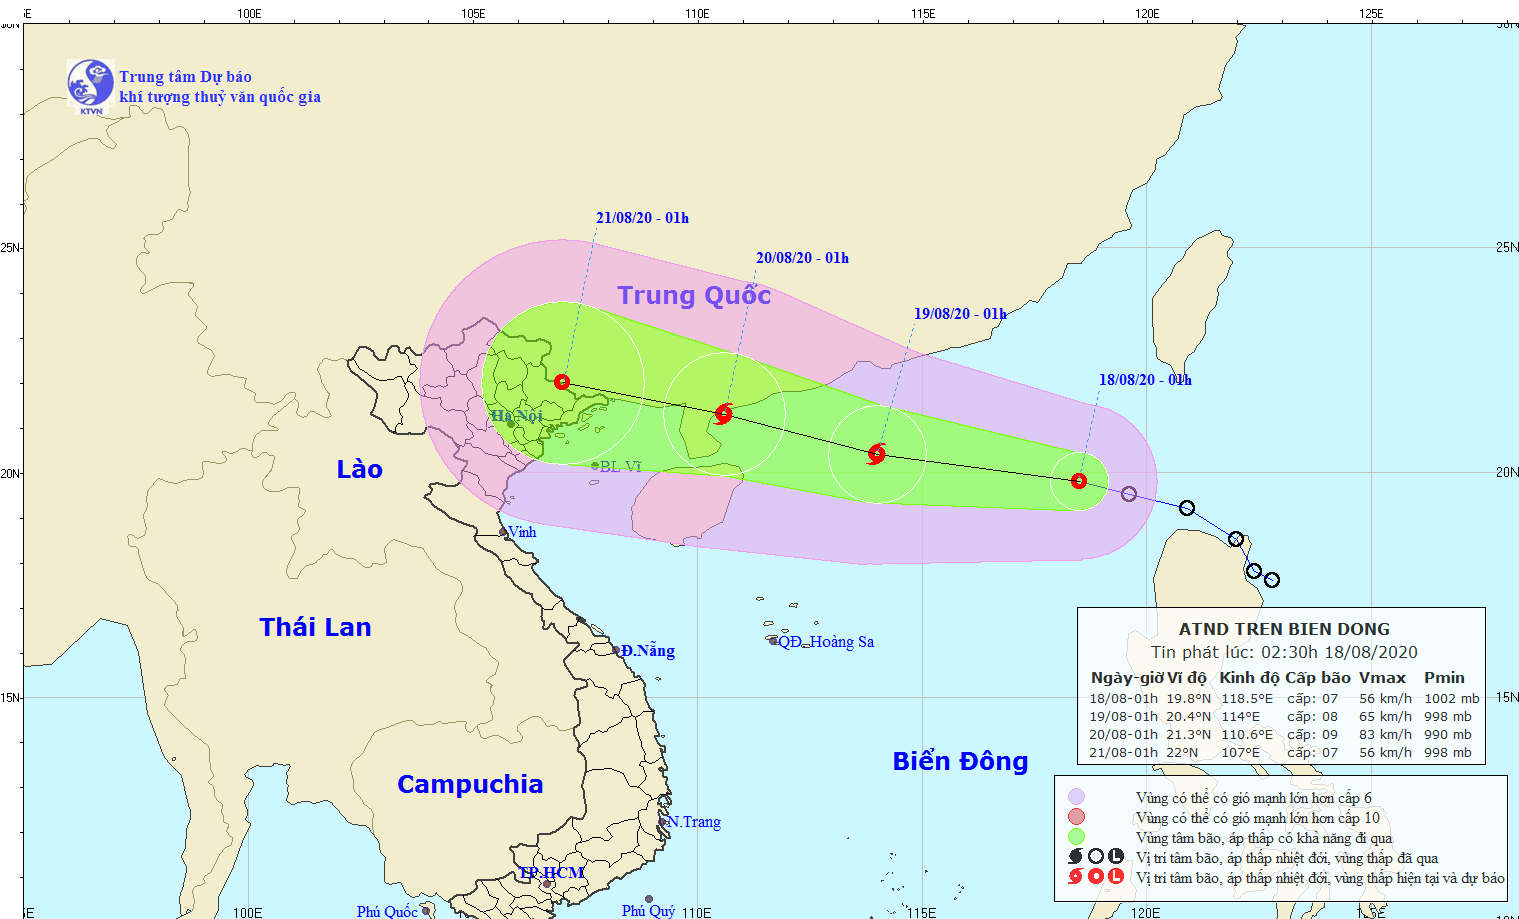 Path map of storm Higos in the East Sea 